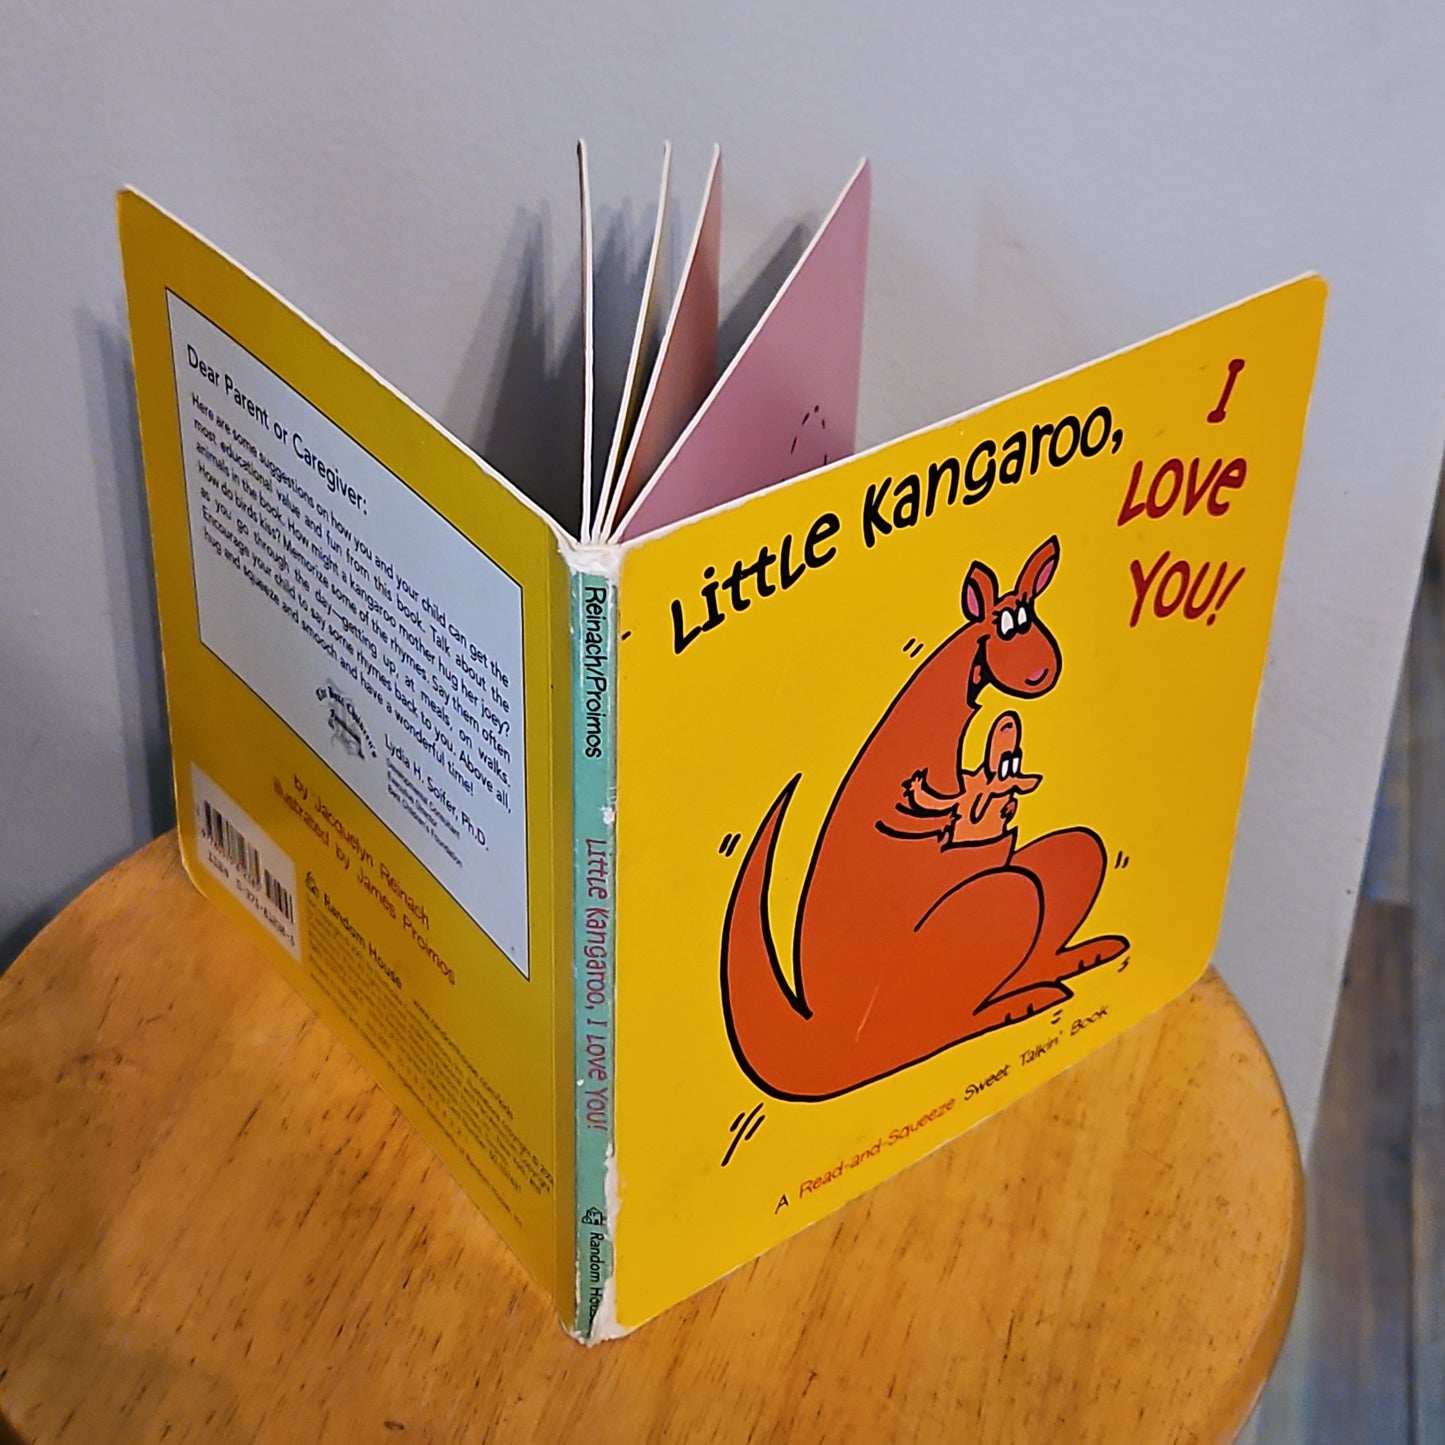 Little Kangaroo, I Love You! By Jacquelyn Reinach Illustrated By James Proimos